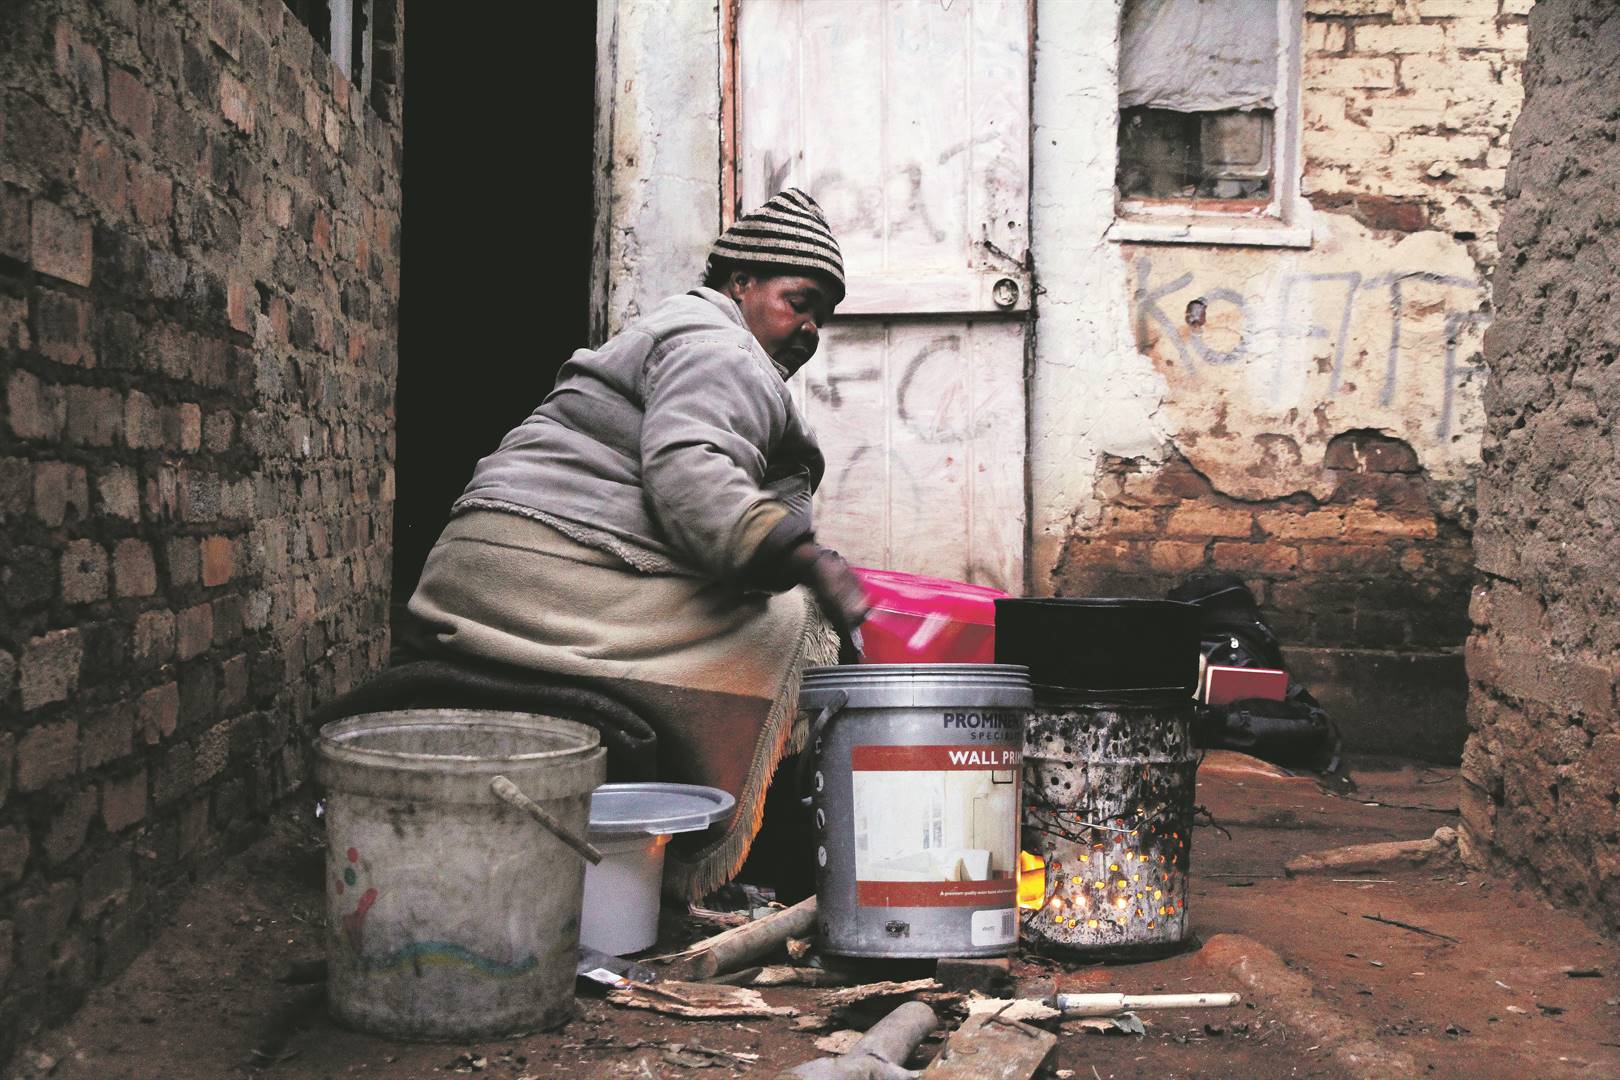  A woman makes amagwinya (fat cakes) at her residence in Vlakplaas, an informal settlement located in the heart of Vosloorus in Ekurhuleni. She started selling amagwinya to feed herself and her children after she lost her job when her employer relocated to another province. She is one of millions of South Africans who live below the poverty line. Photo: Rosetta Msimango